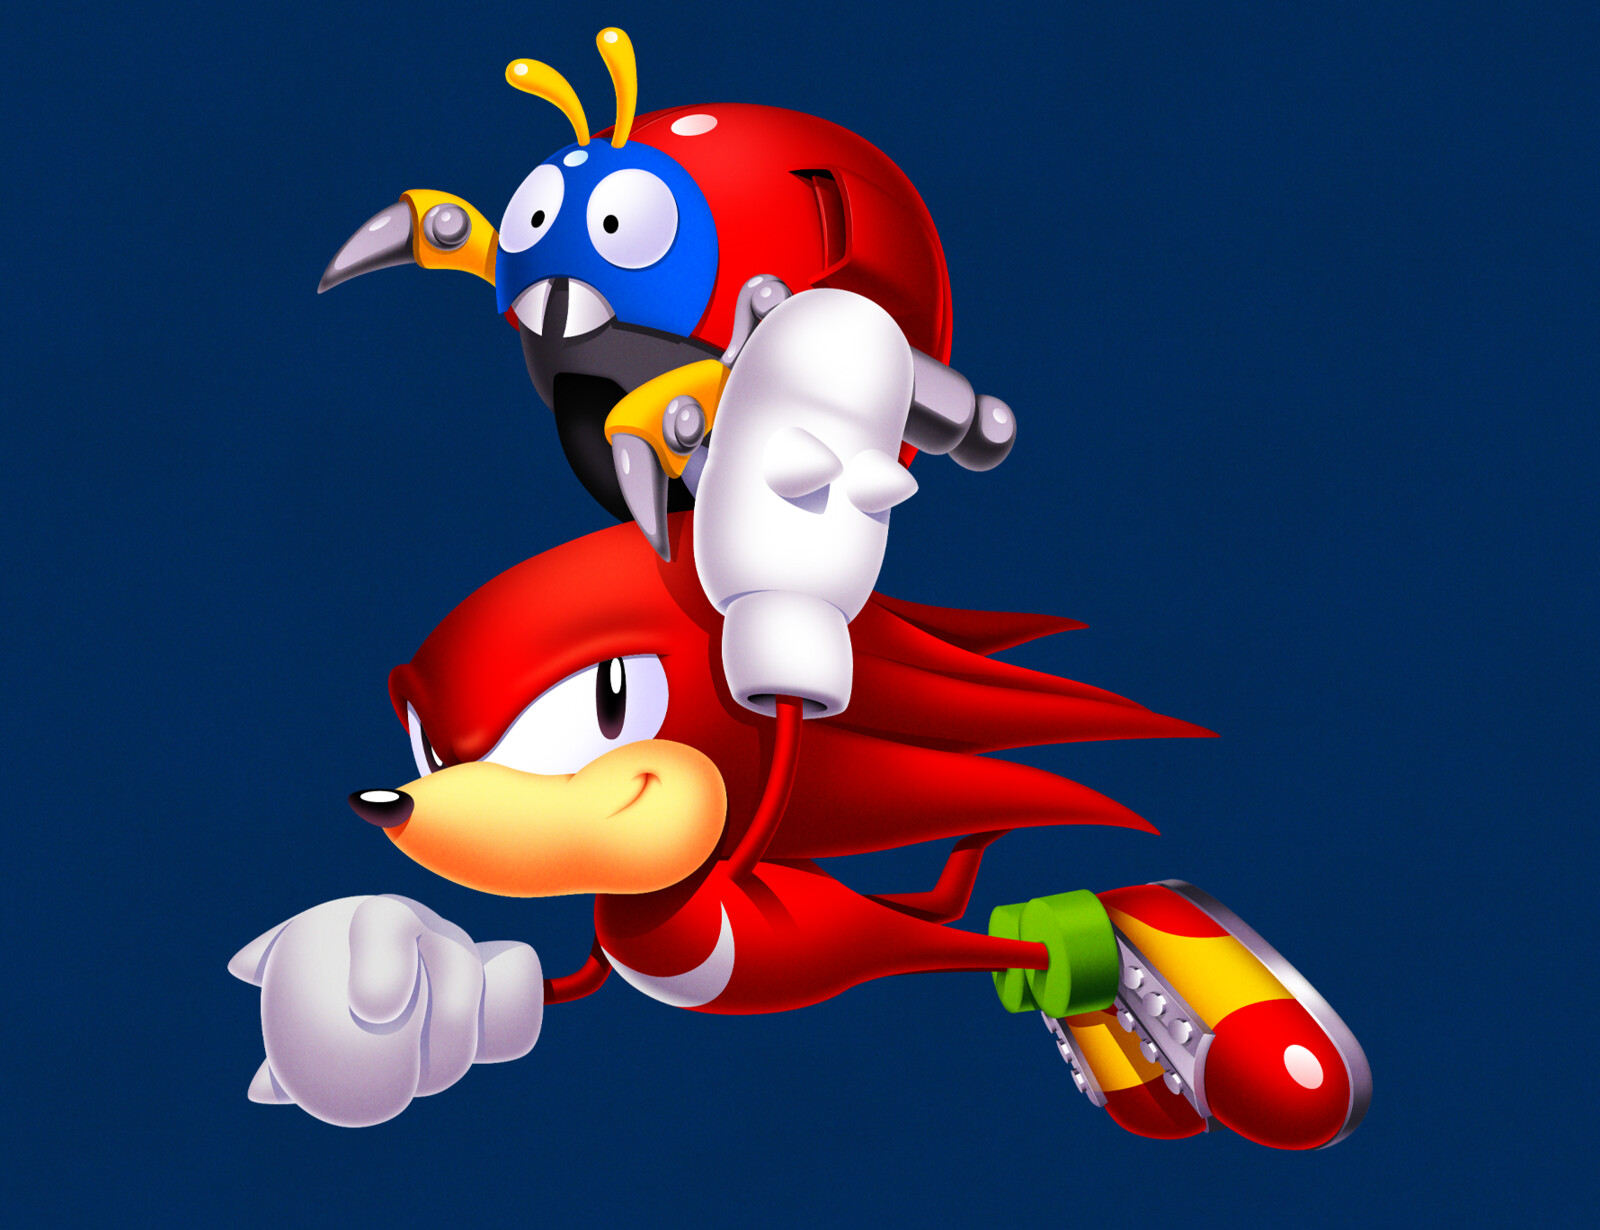 Knuckles (Screensaver Style)